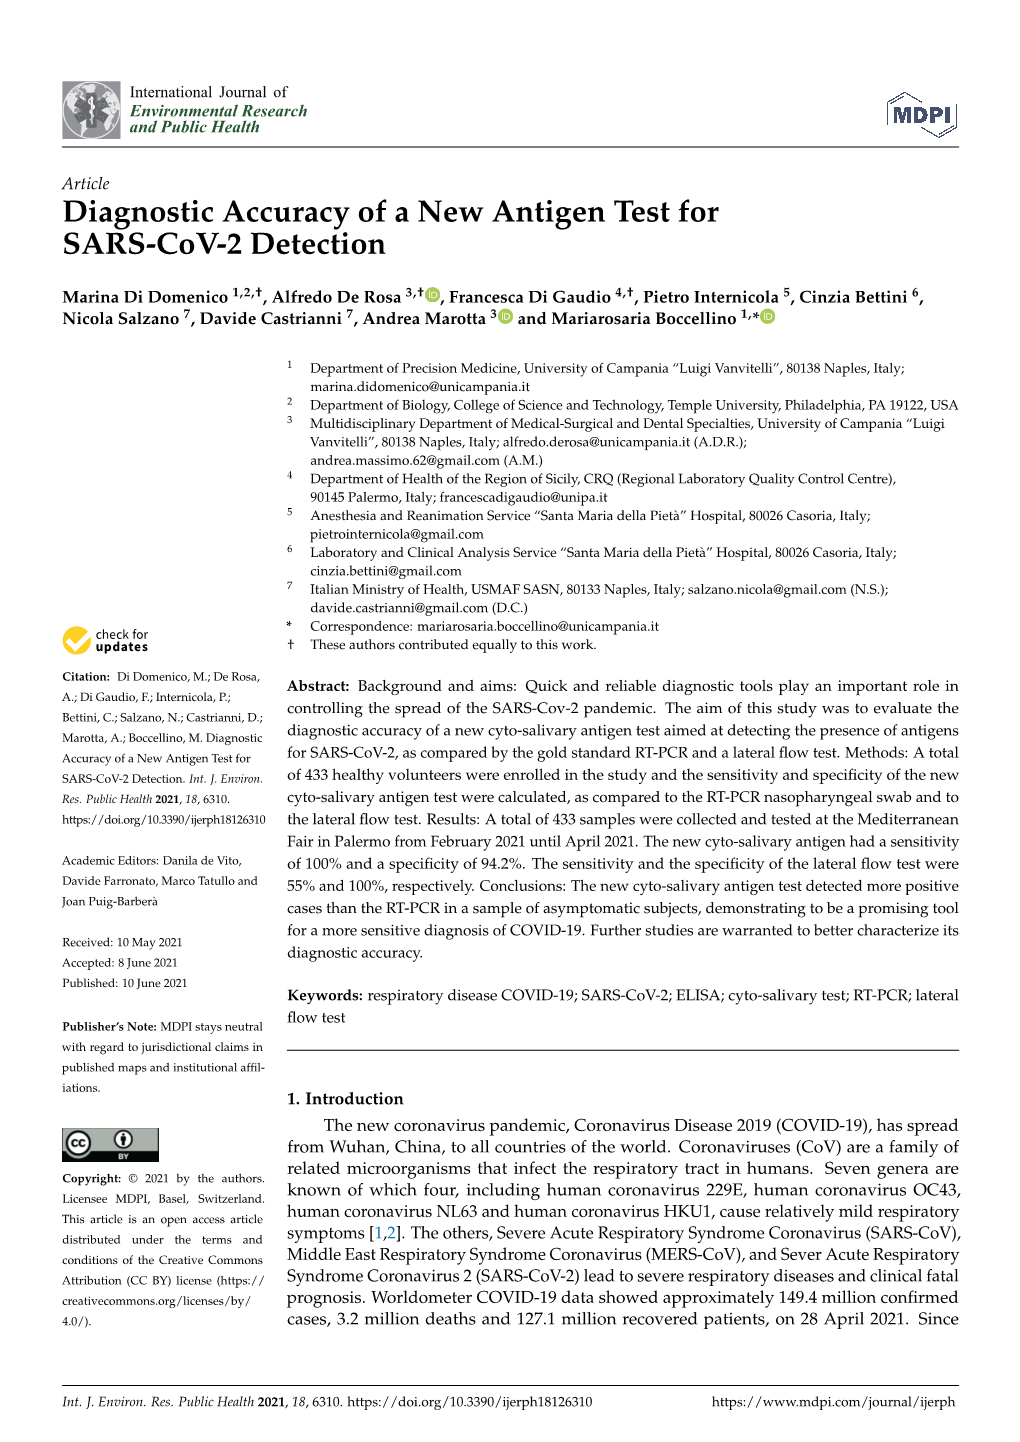 Diagnostic Accuracy of a New Antigen Test for SARS-Cov-2 Detection